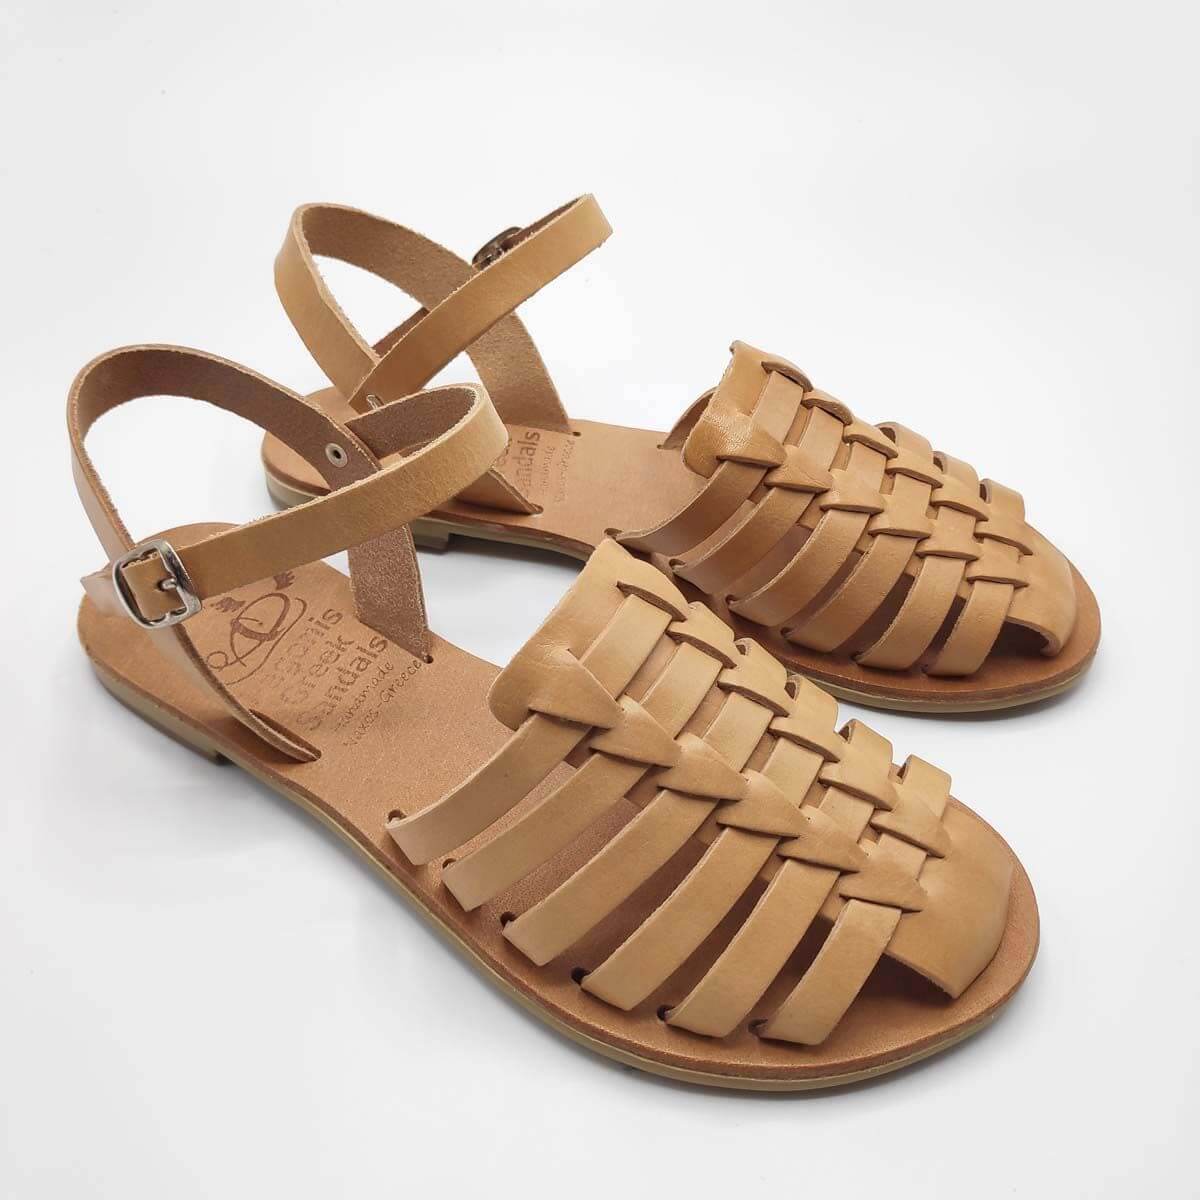 VATHI closed toe sandals for women | Pagonis Greek Sandals